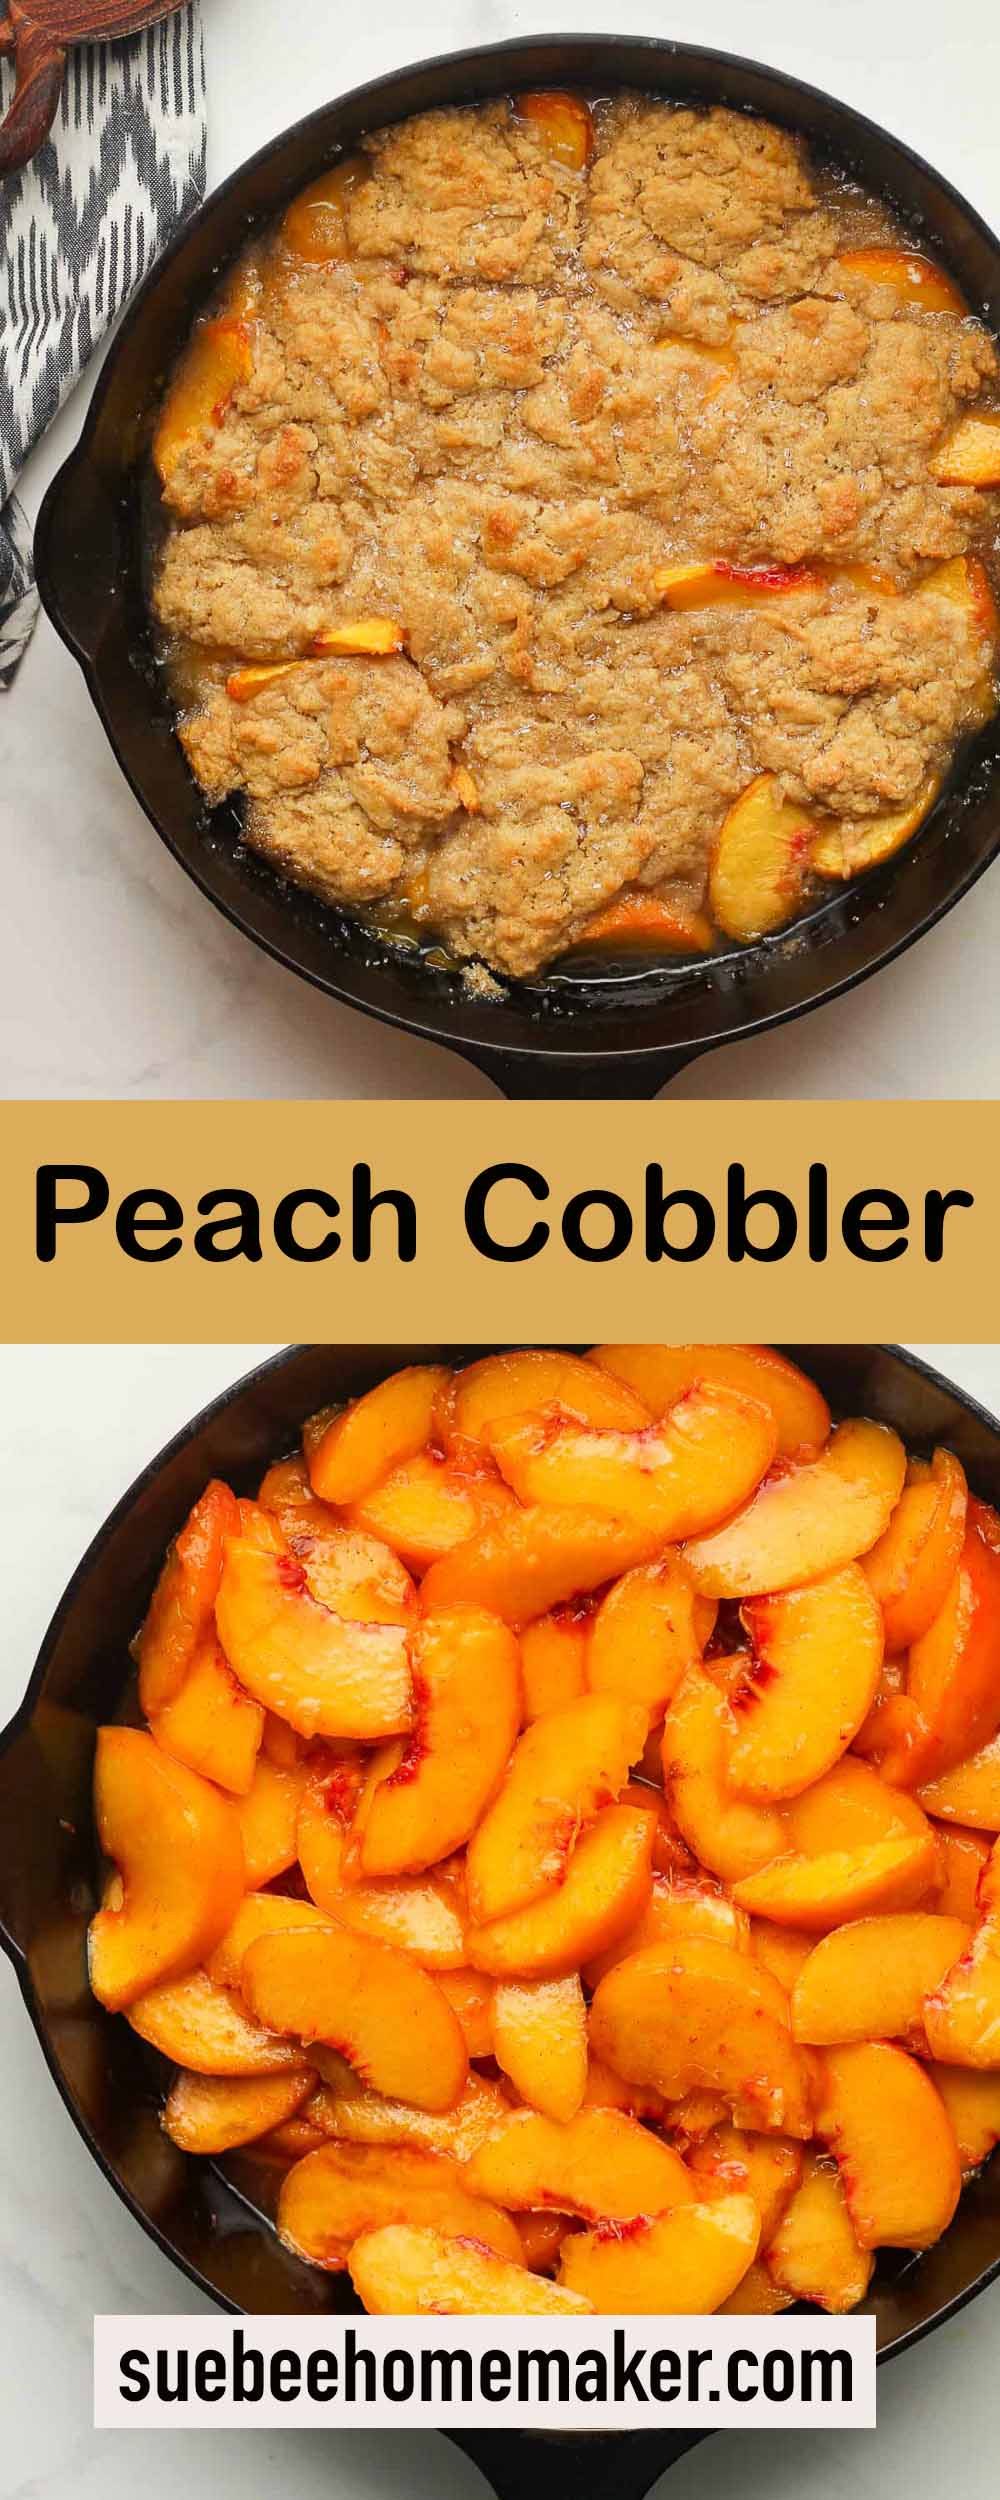 Two photos for peach cobbler in a skillet.